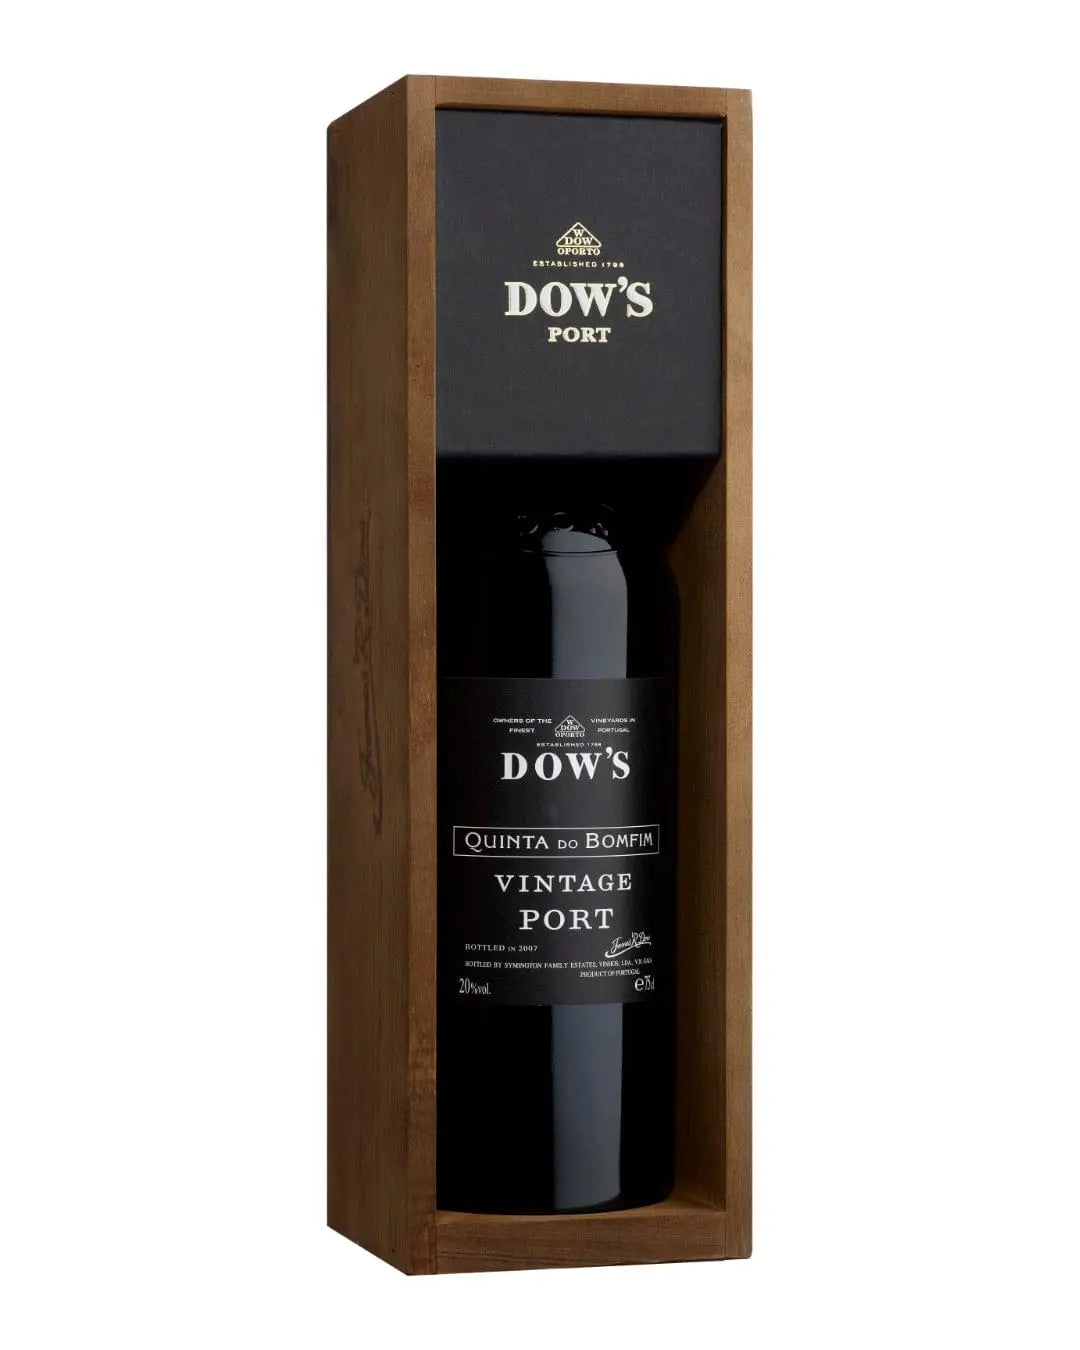 Dow's Bomfim Vintage Port 2013 Gift Box, 75 cl Fortified & Other Wines